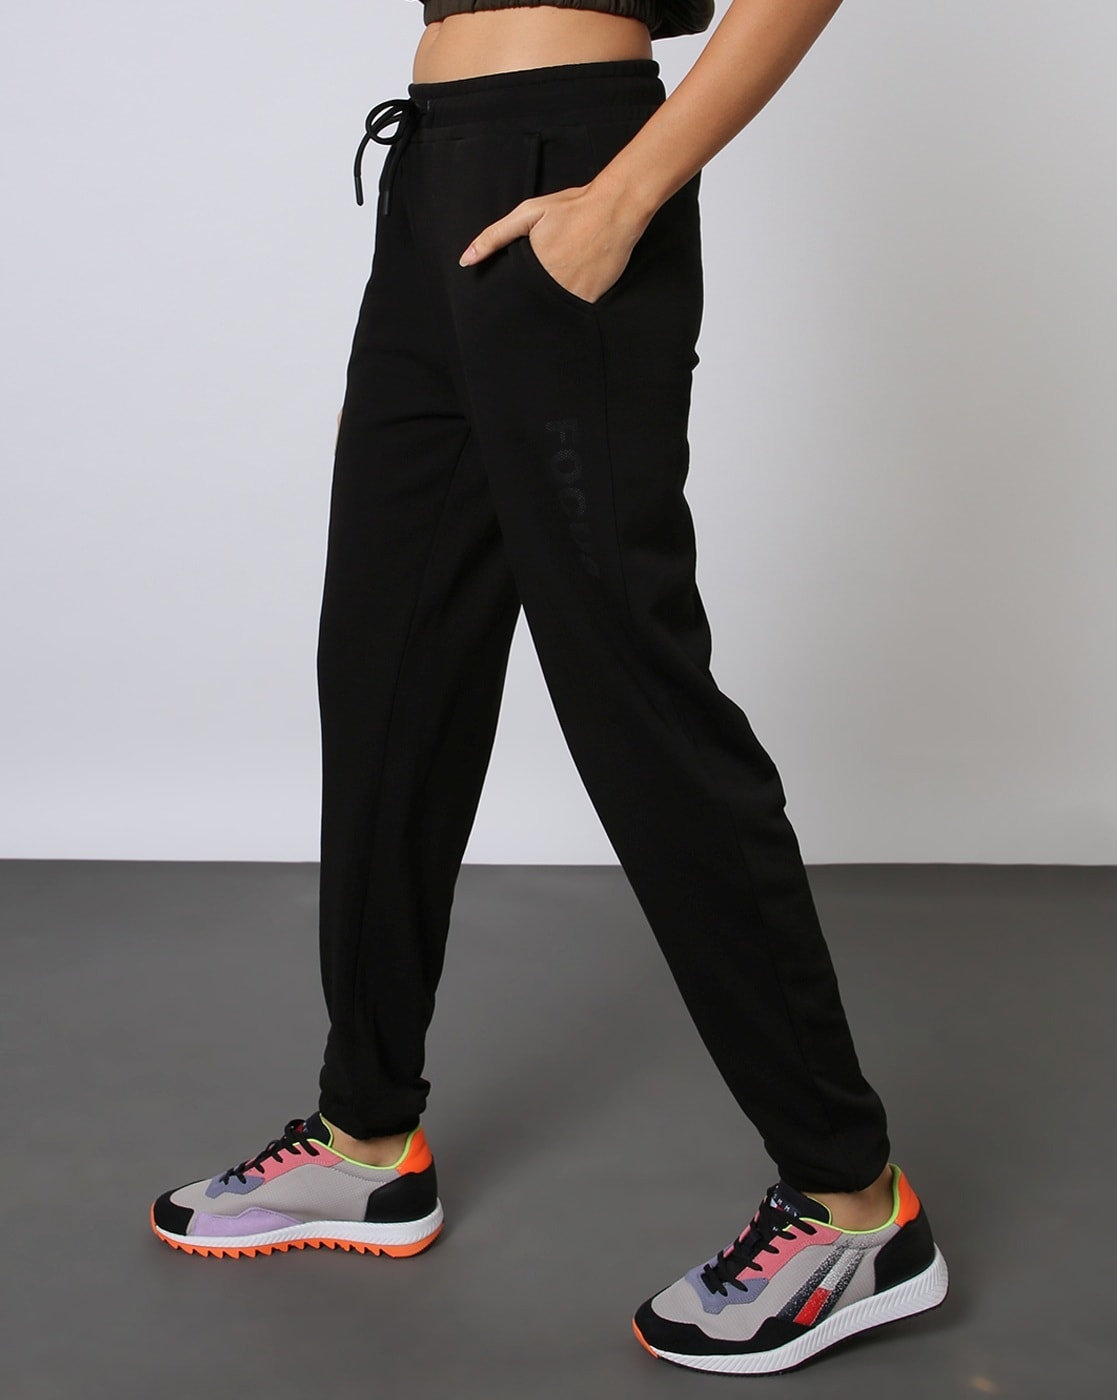 Buy Green Track Pants for Men by Puma Online | Ajio.com